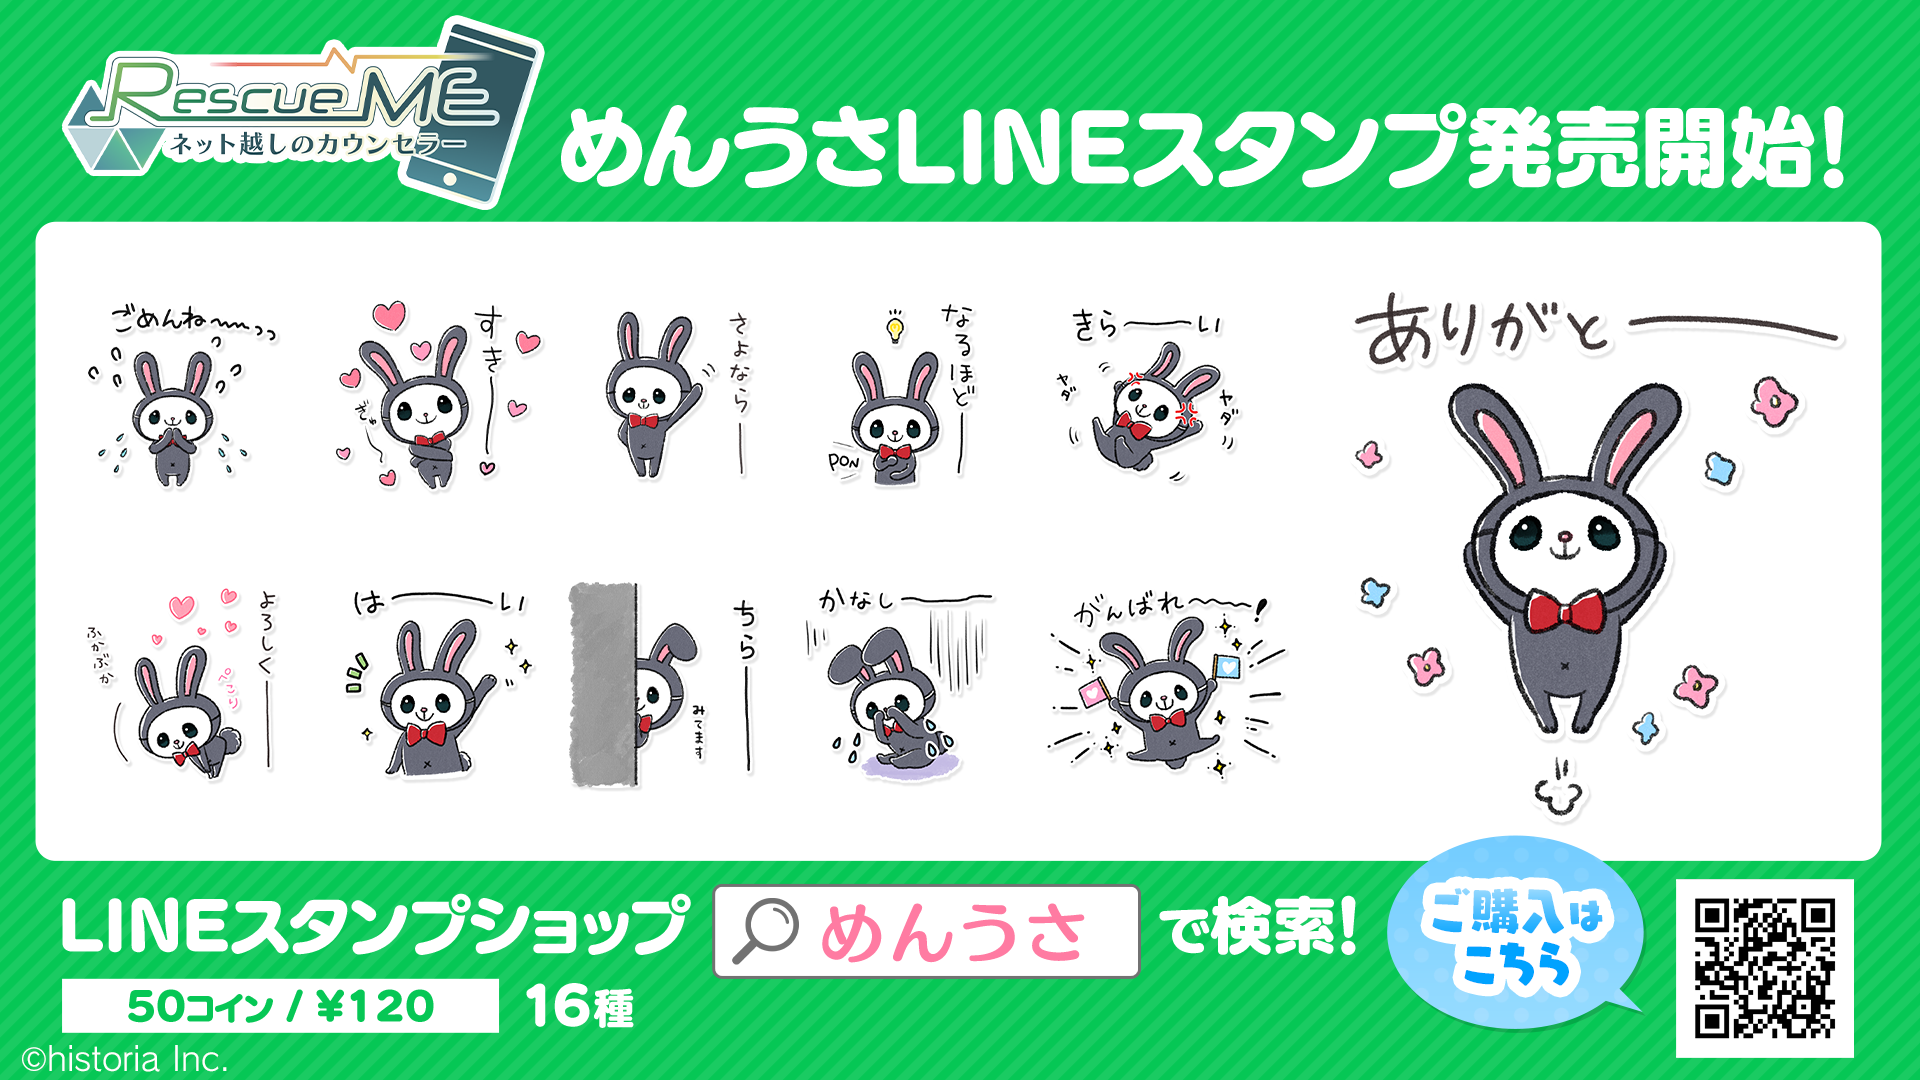 Rescue ME LINEスタンプバナー.png